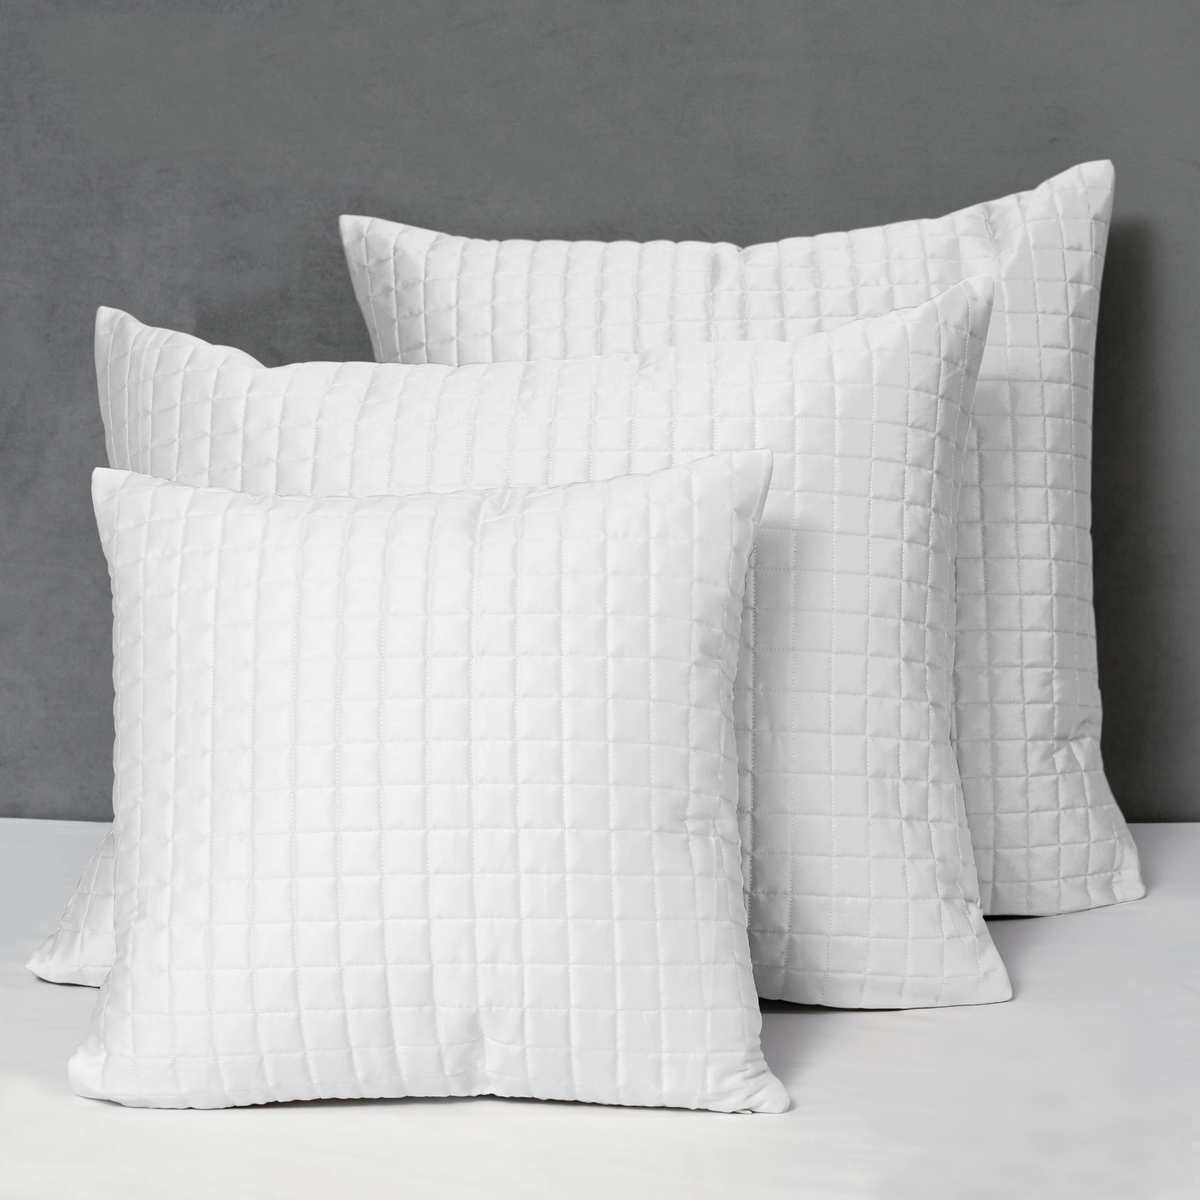 Different Sizes of Quilted Shams of Signoria Masaccio Bedding in White Color